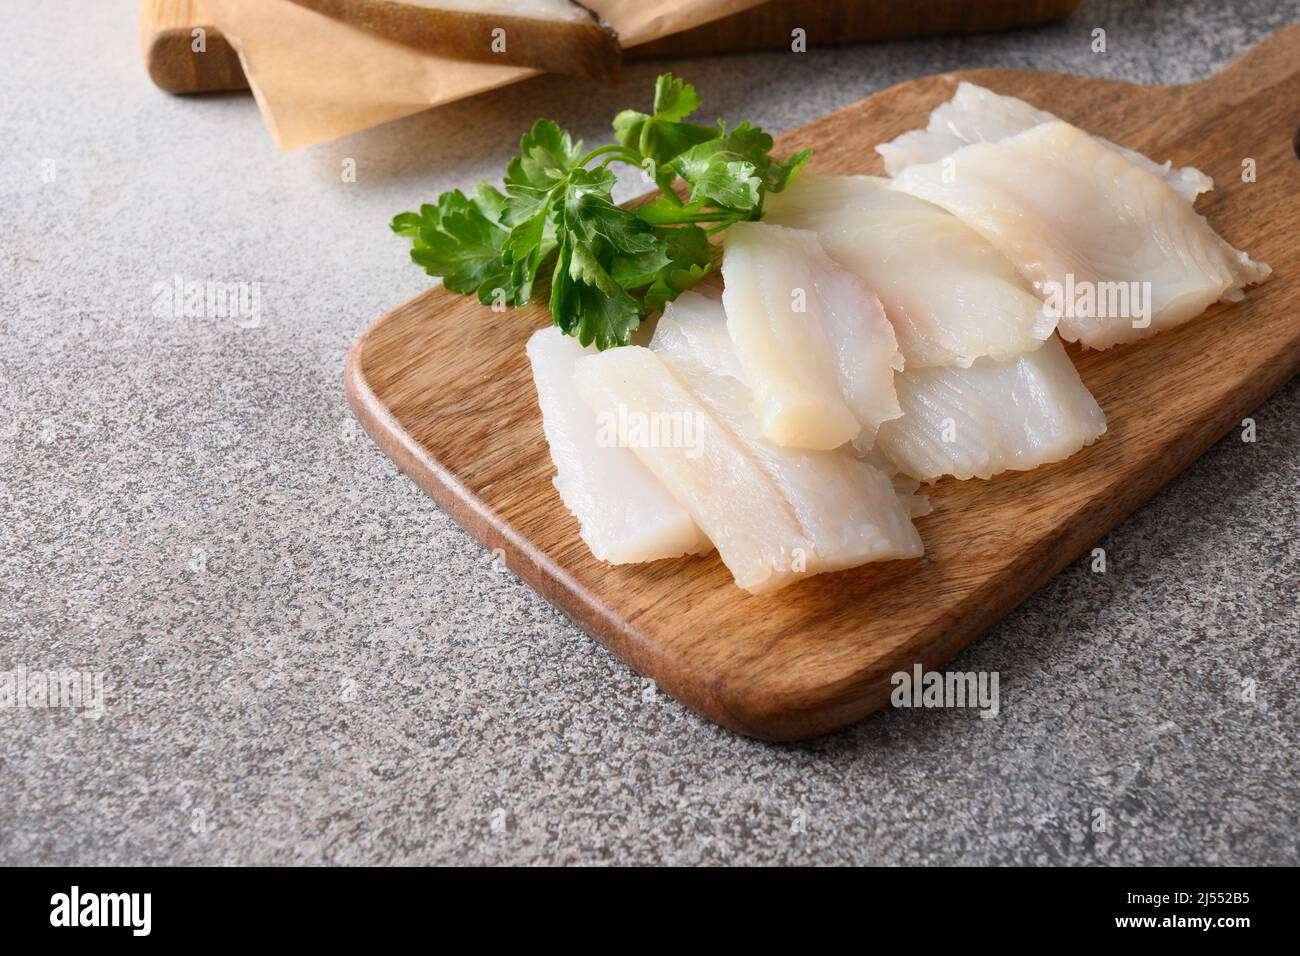 Delicacy fish smoked halibut served with parsley for eating on wooden cutting board. Close up. Rich of healthy omega 3 unsaturated fats. Stock Photo